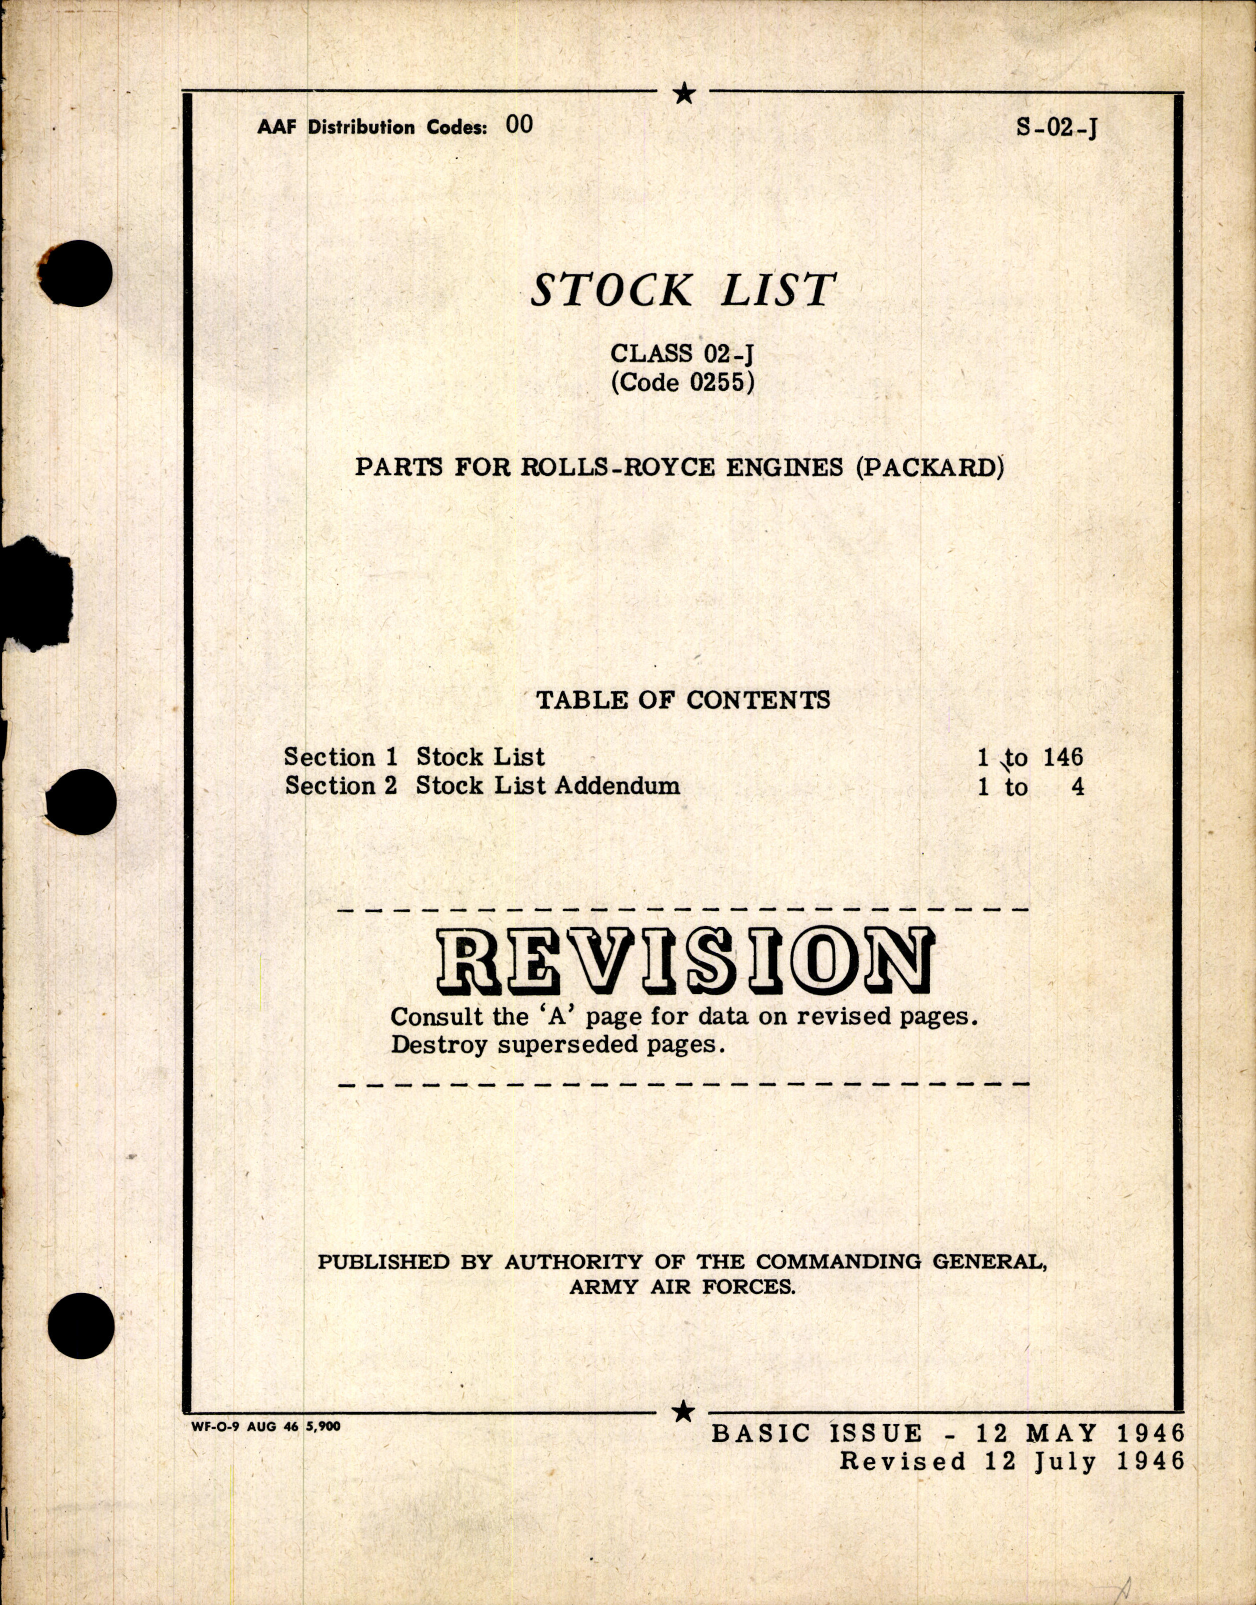 Sample page 7 from AirCorps Library document: Stock List - Parts For Rolls-Royce Engines (Packard)